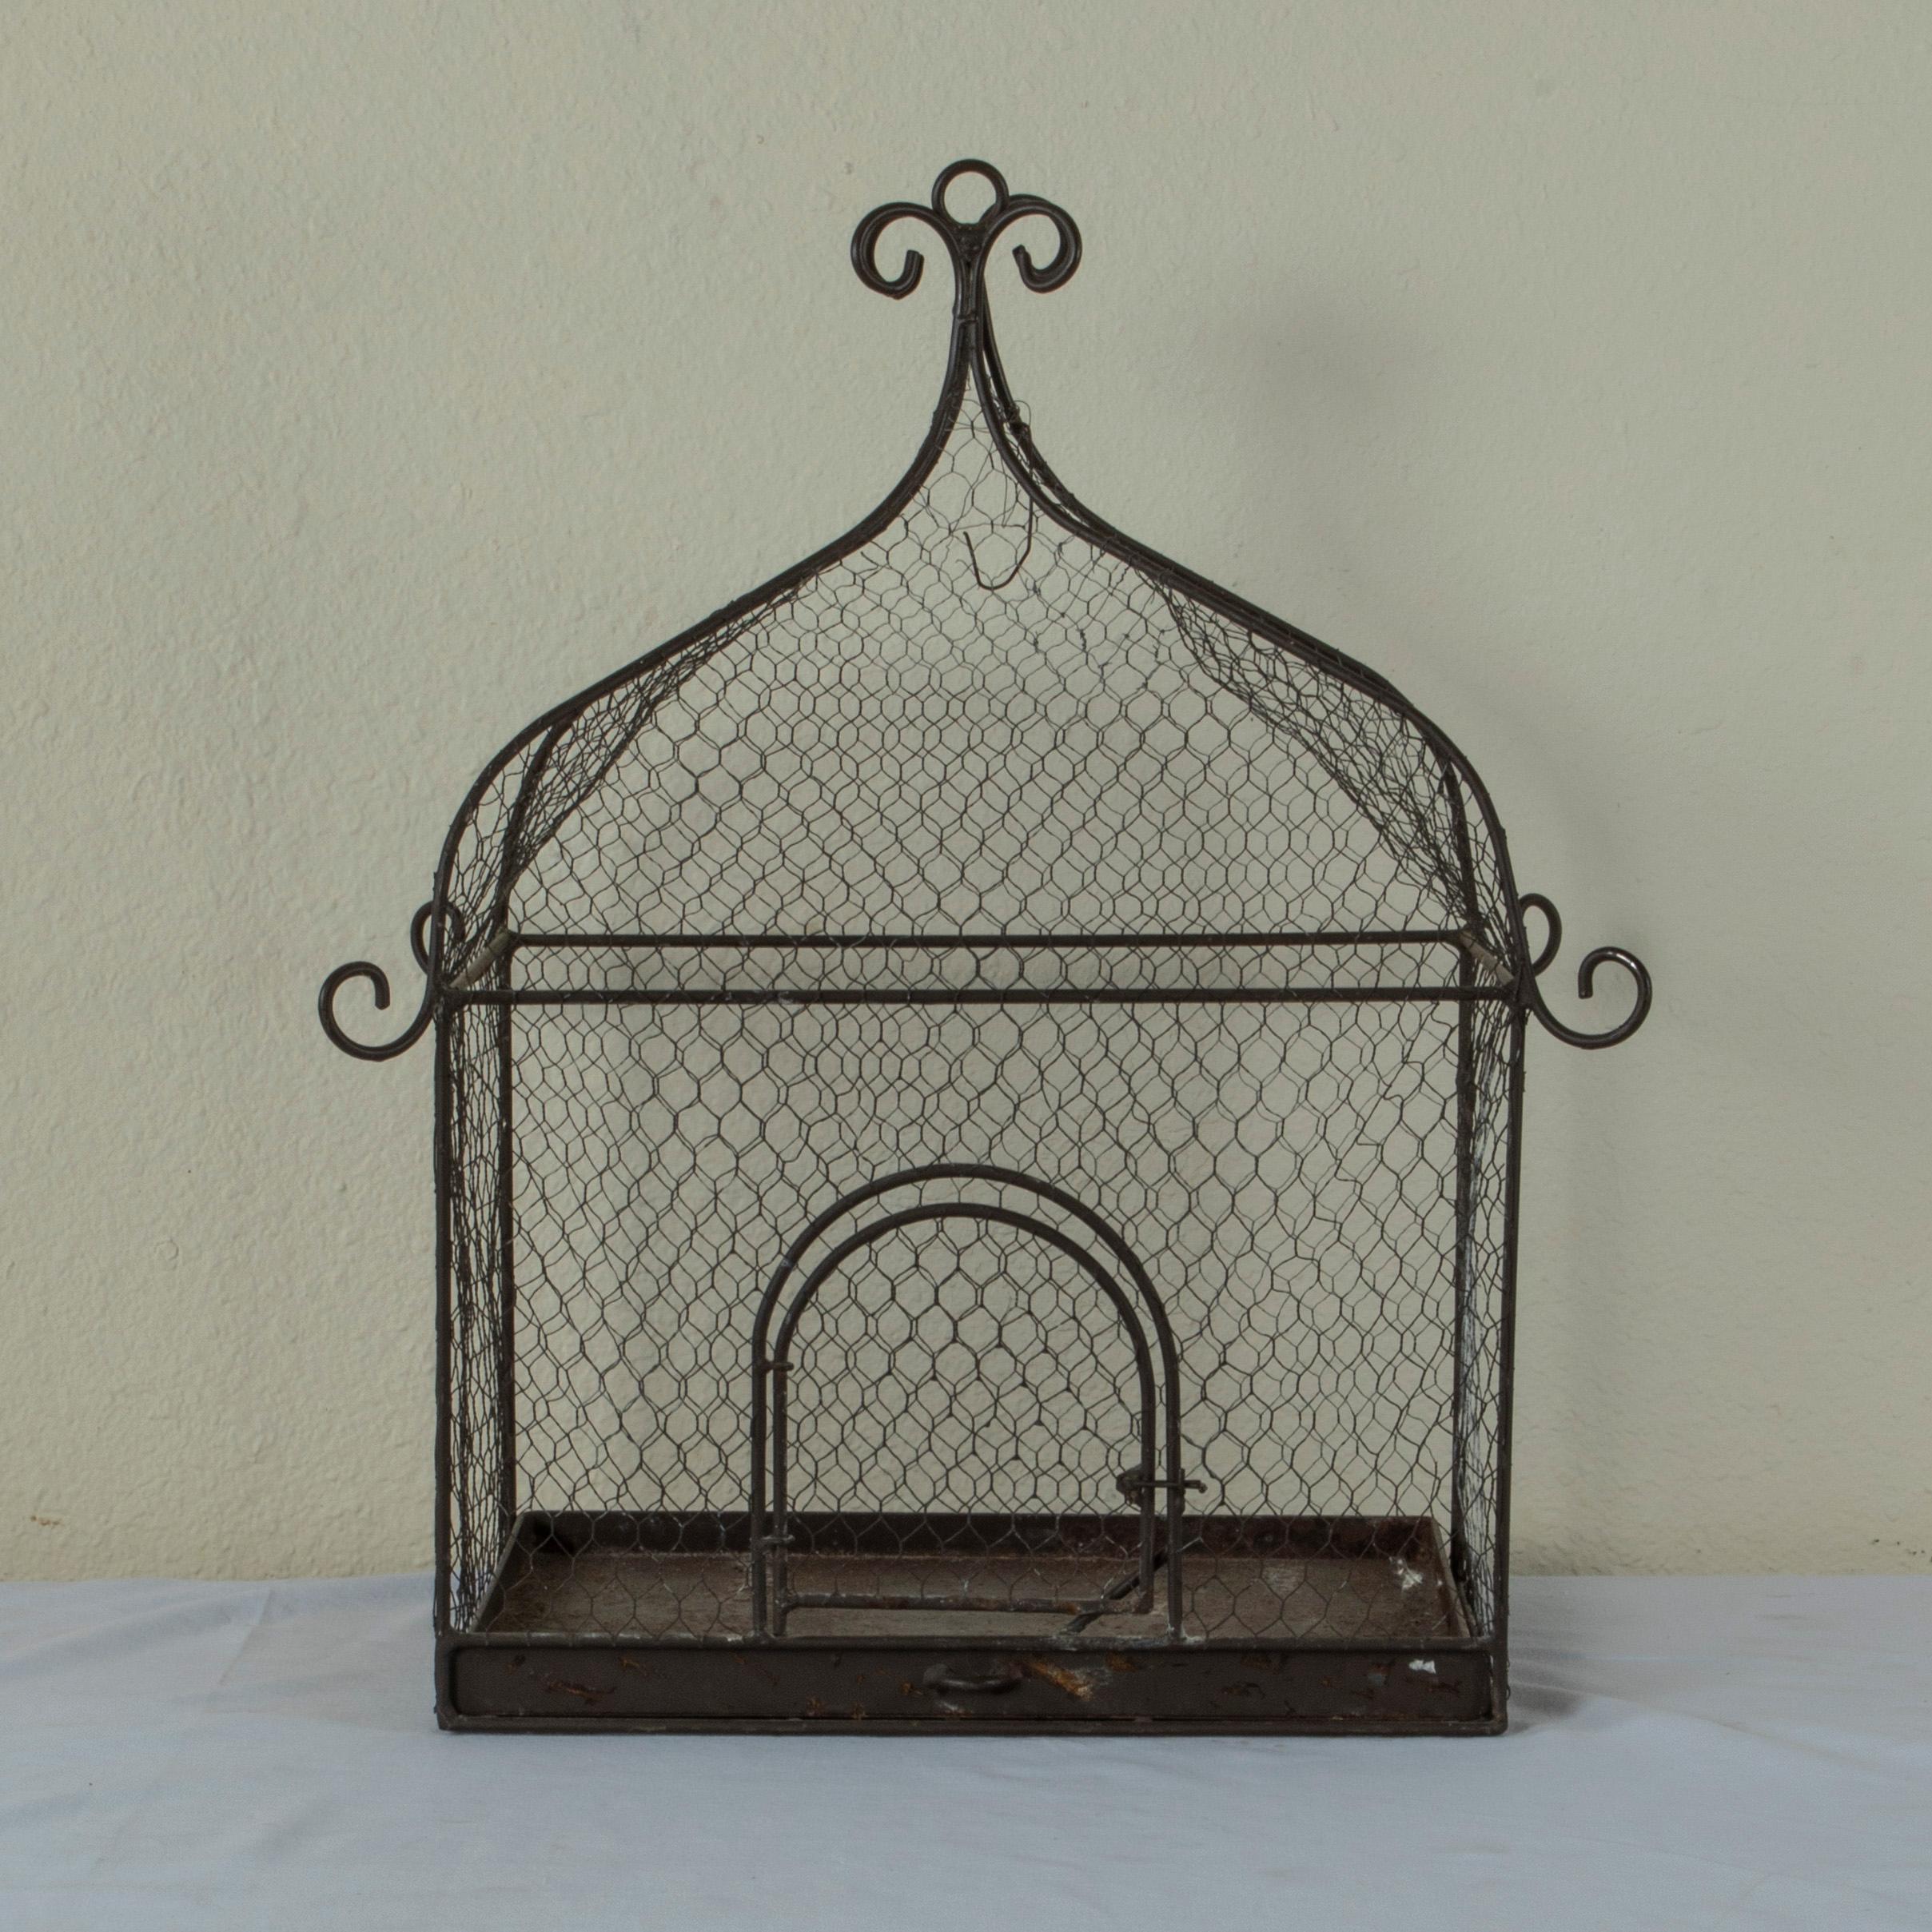 This mid-century French iron birdcage fitted with aviary wire features a pullout tray in the bottom and scrolling details at the corners and on the crown. A hinged door allows access to the interior. This birdcage may either be placed on a surface